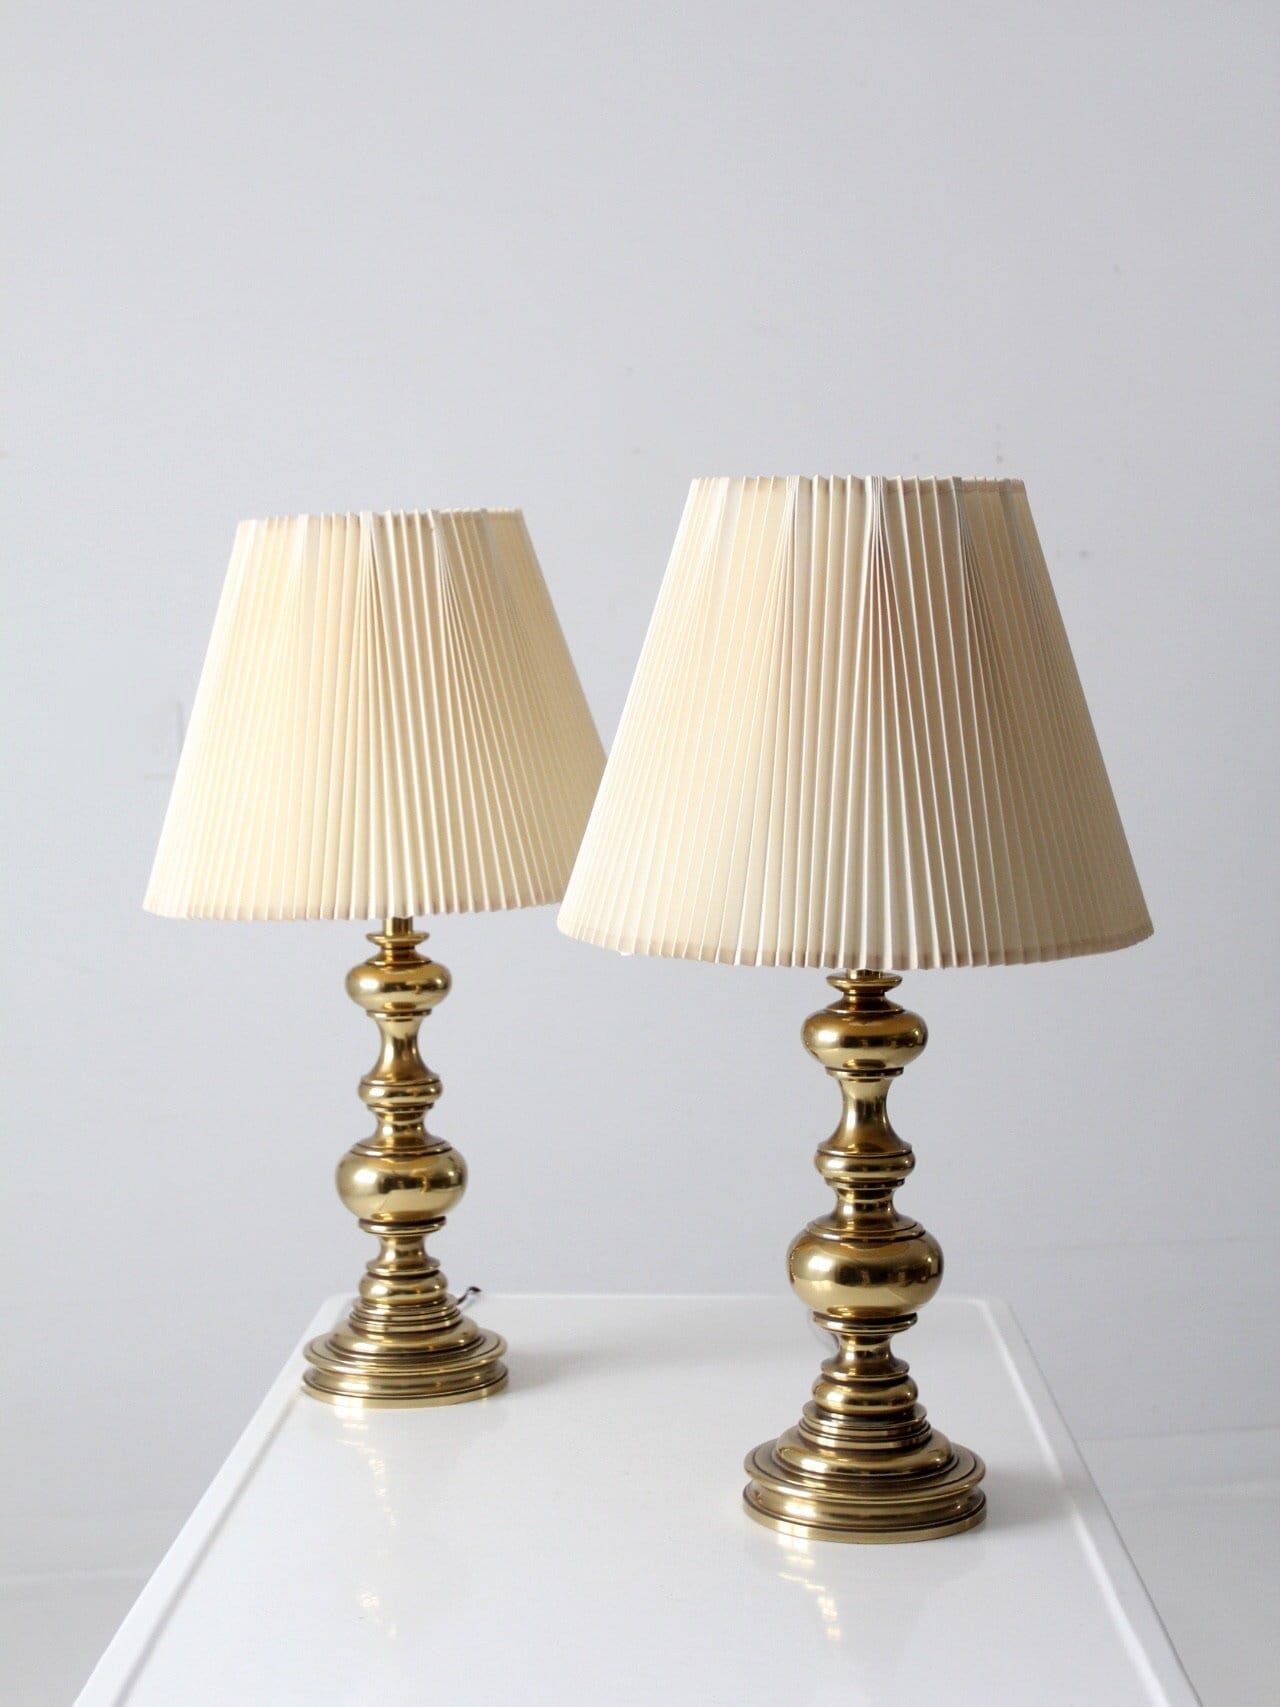 Antique Brass Table Lamp Explore the Timeless Elegance of Brass Table Lamps